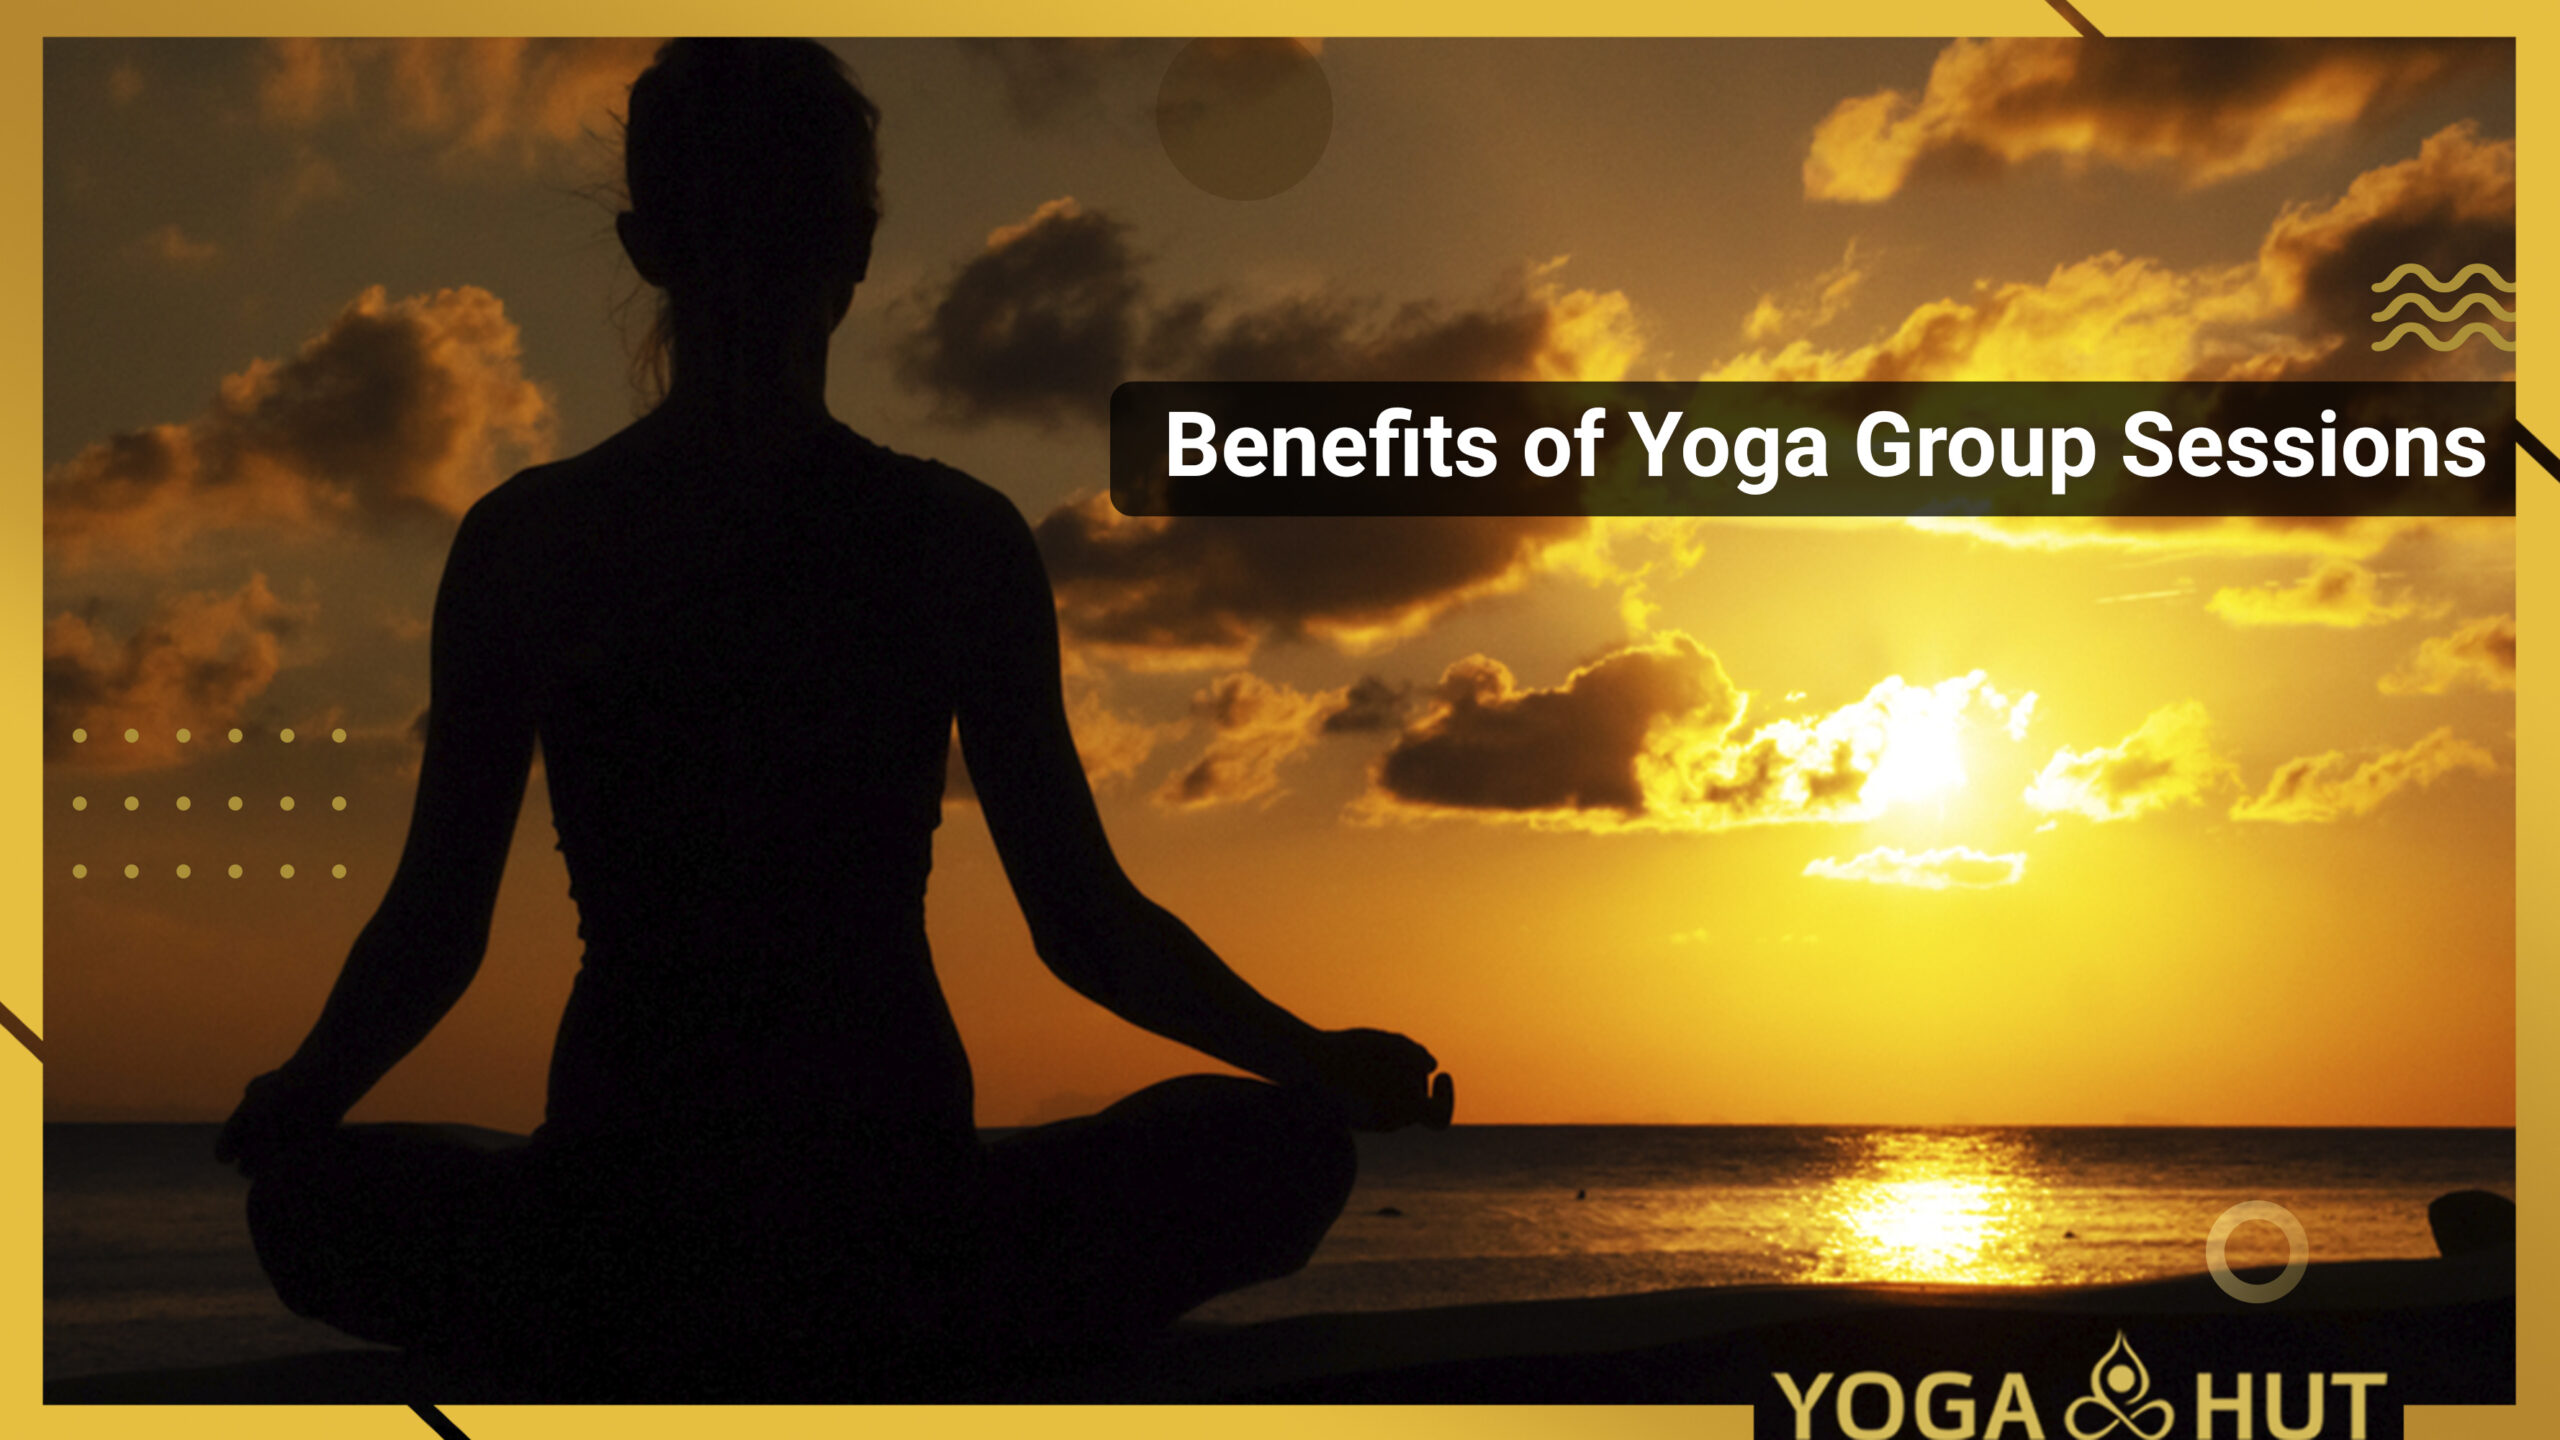 Benefits of Yoga Group Sessions